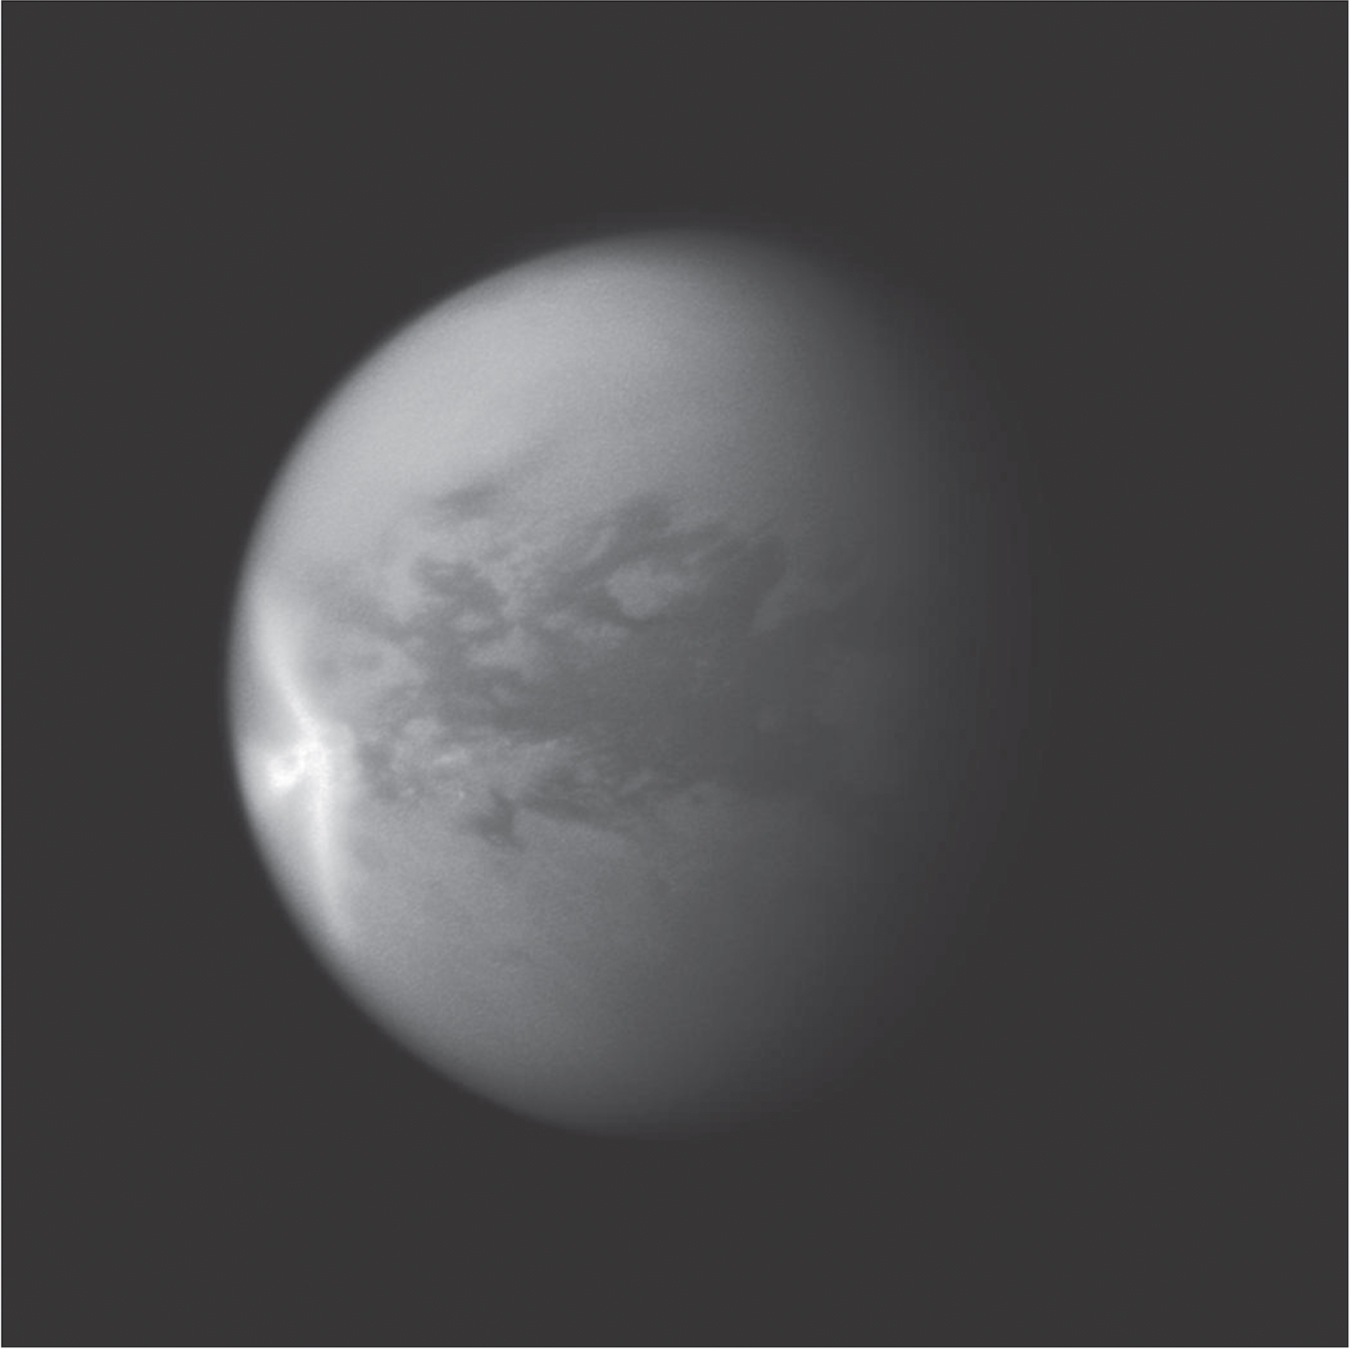 Cassini has greatly expanded our understanding of cloud on Titan, revealing unexpected morphologies such as the giant "arrow-shaped" cloud (near left in photo) of 2011. Rainfall darkened the surface which covered over 500,000 km2. After the methane evaporated, it was followed by localised surface brightening.                                          Image credit: NASA/JPL/STScI. Image PIA12817